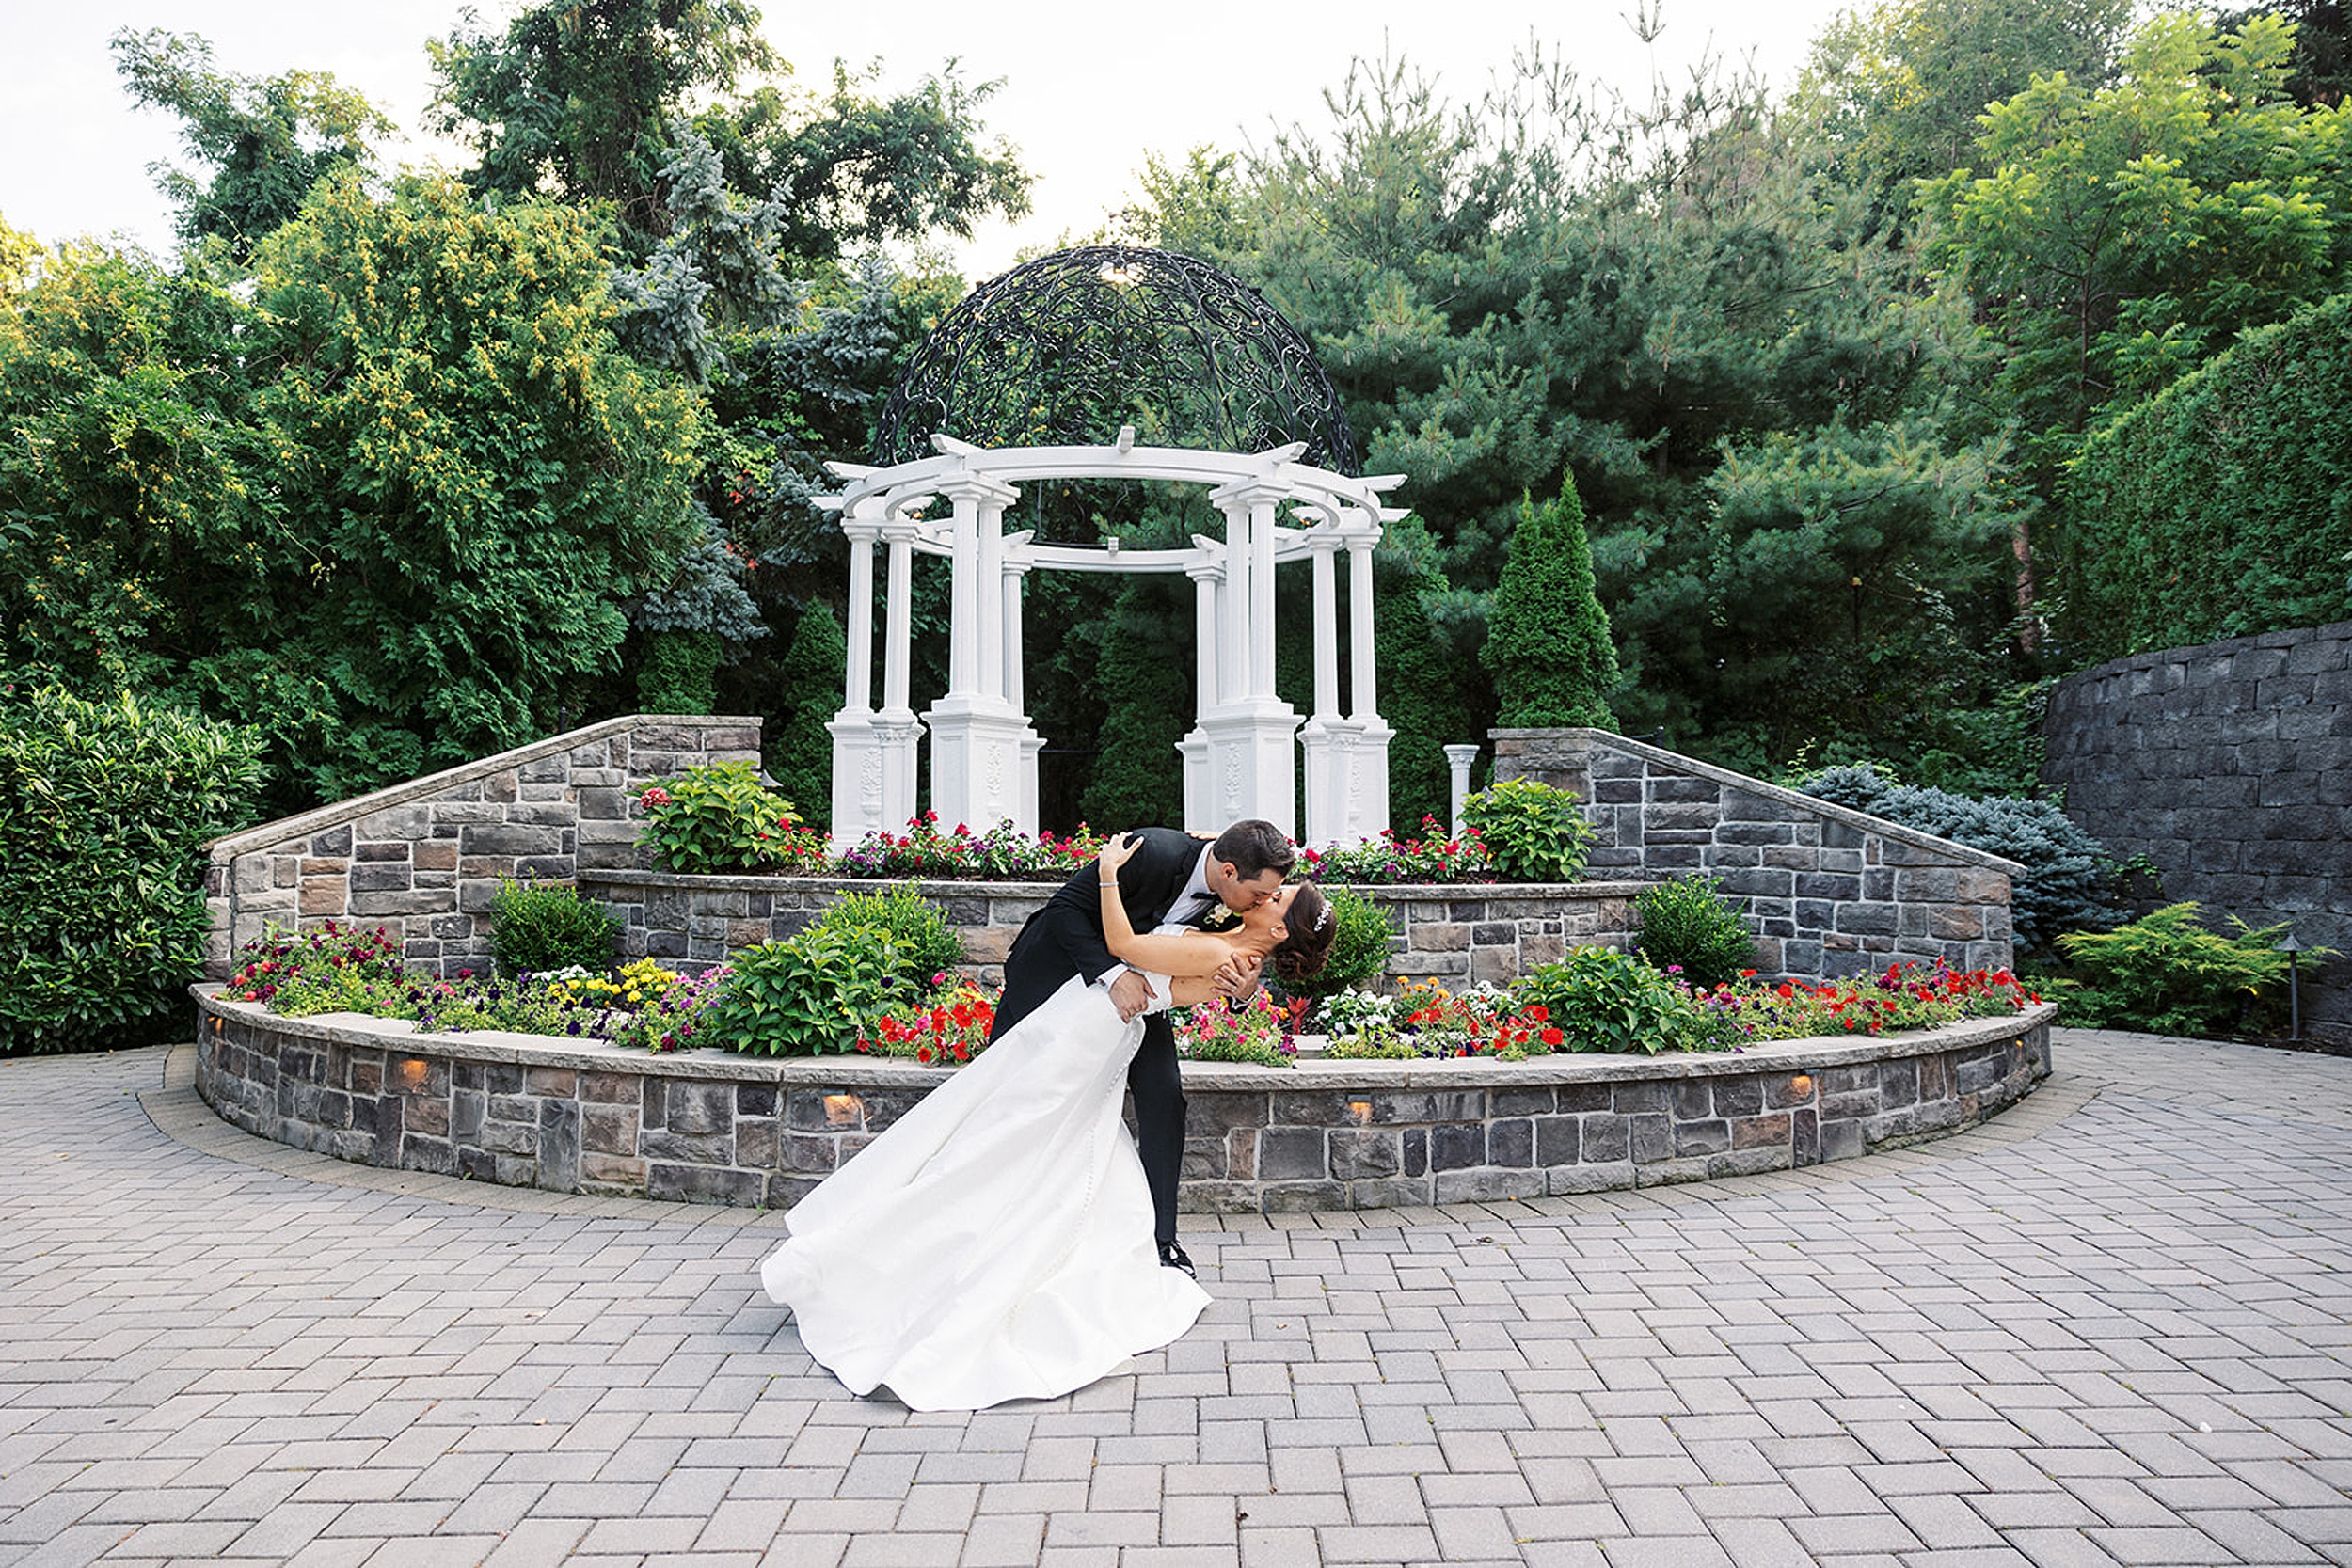 A groom dips and kisses his bride in front of a large raised garden bed with a white gazebo above it at a valley regency wedding